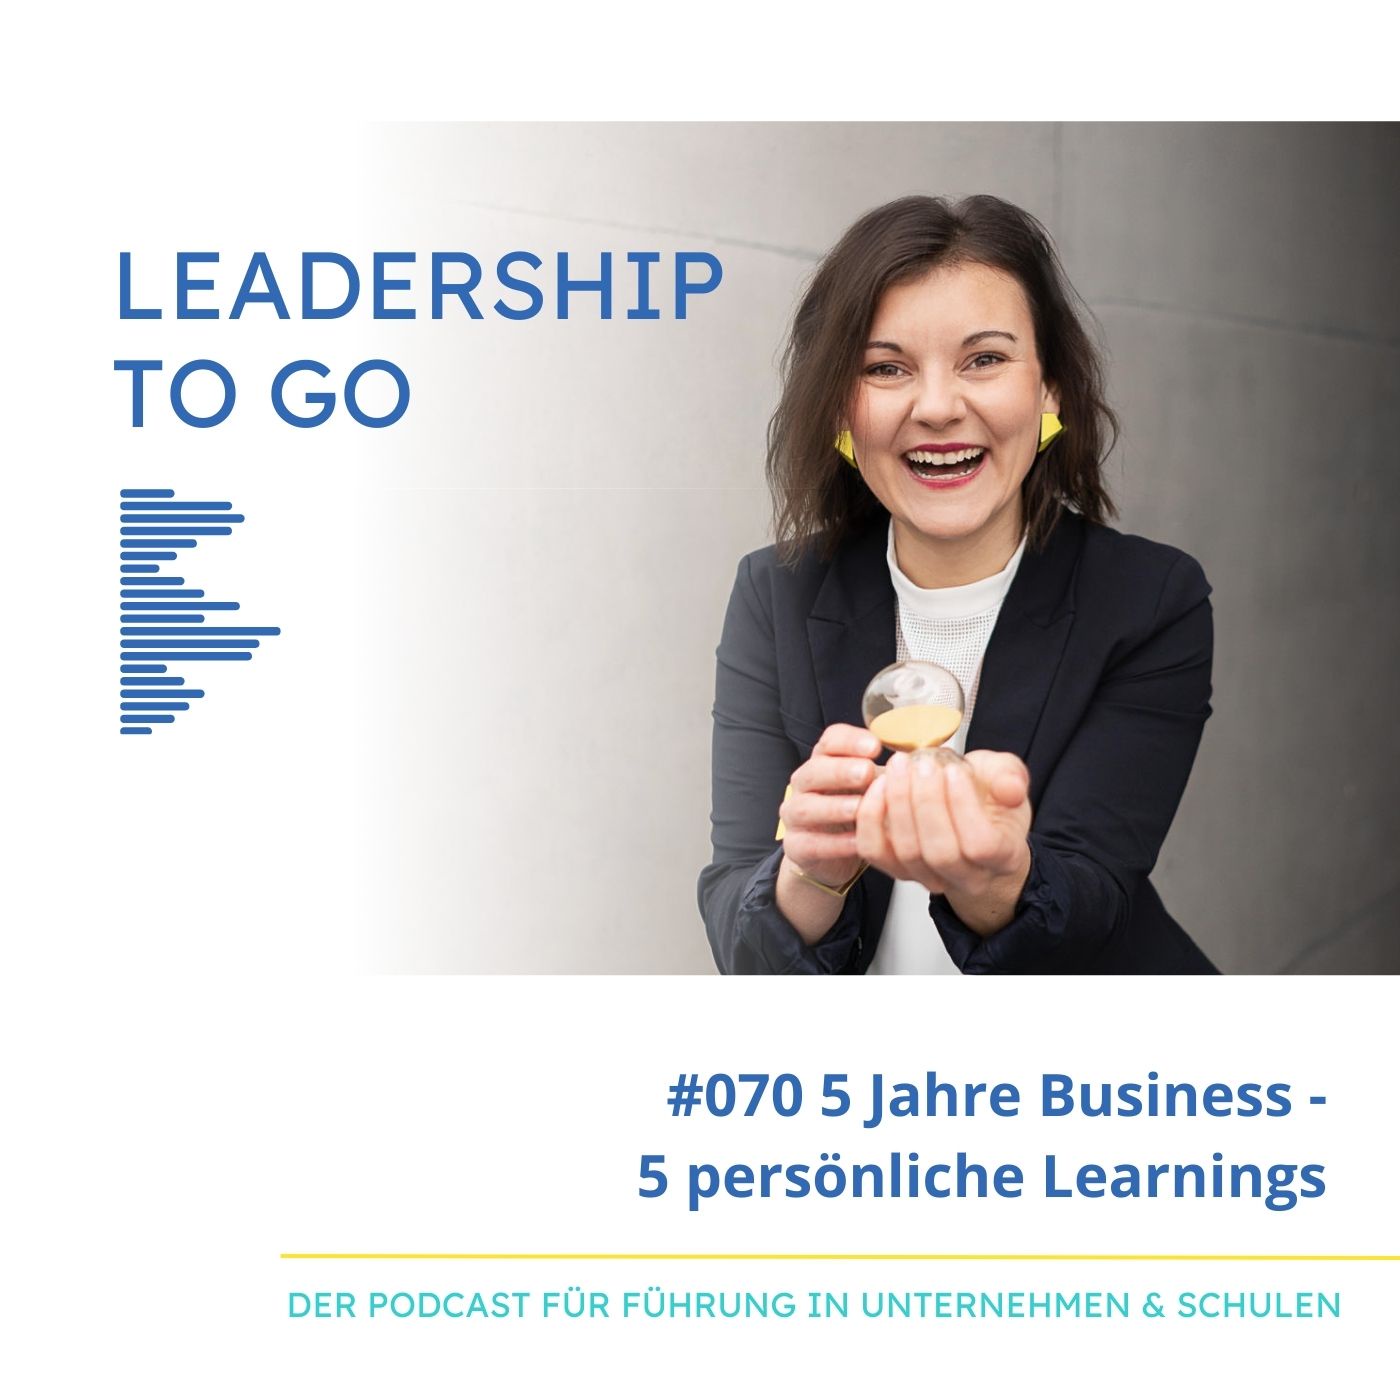 #070 5 Jahre Business - 5 persönliche Learnings